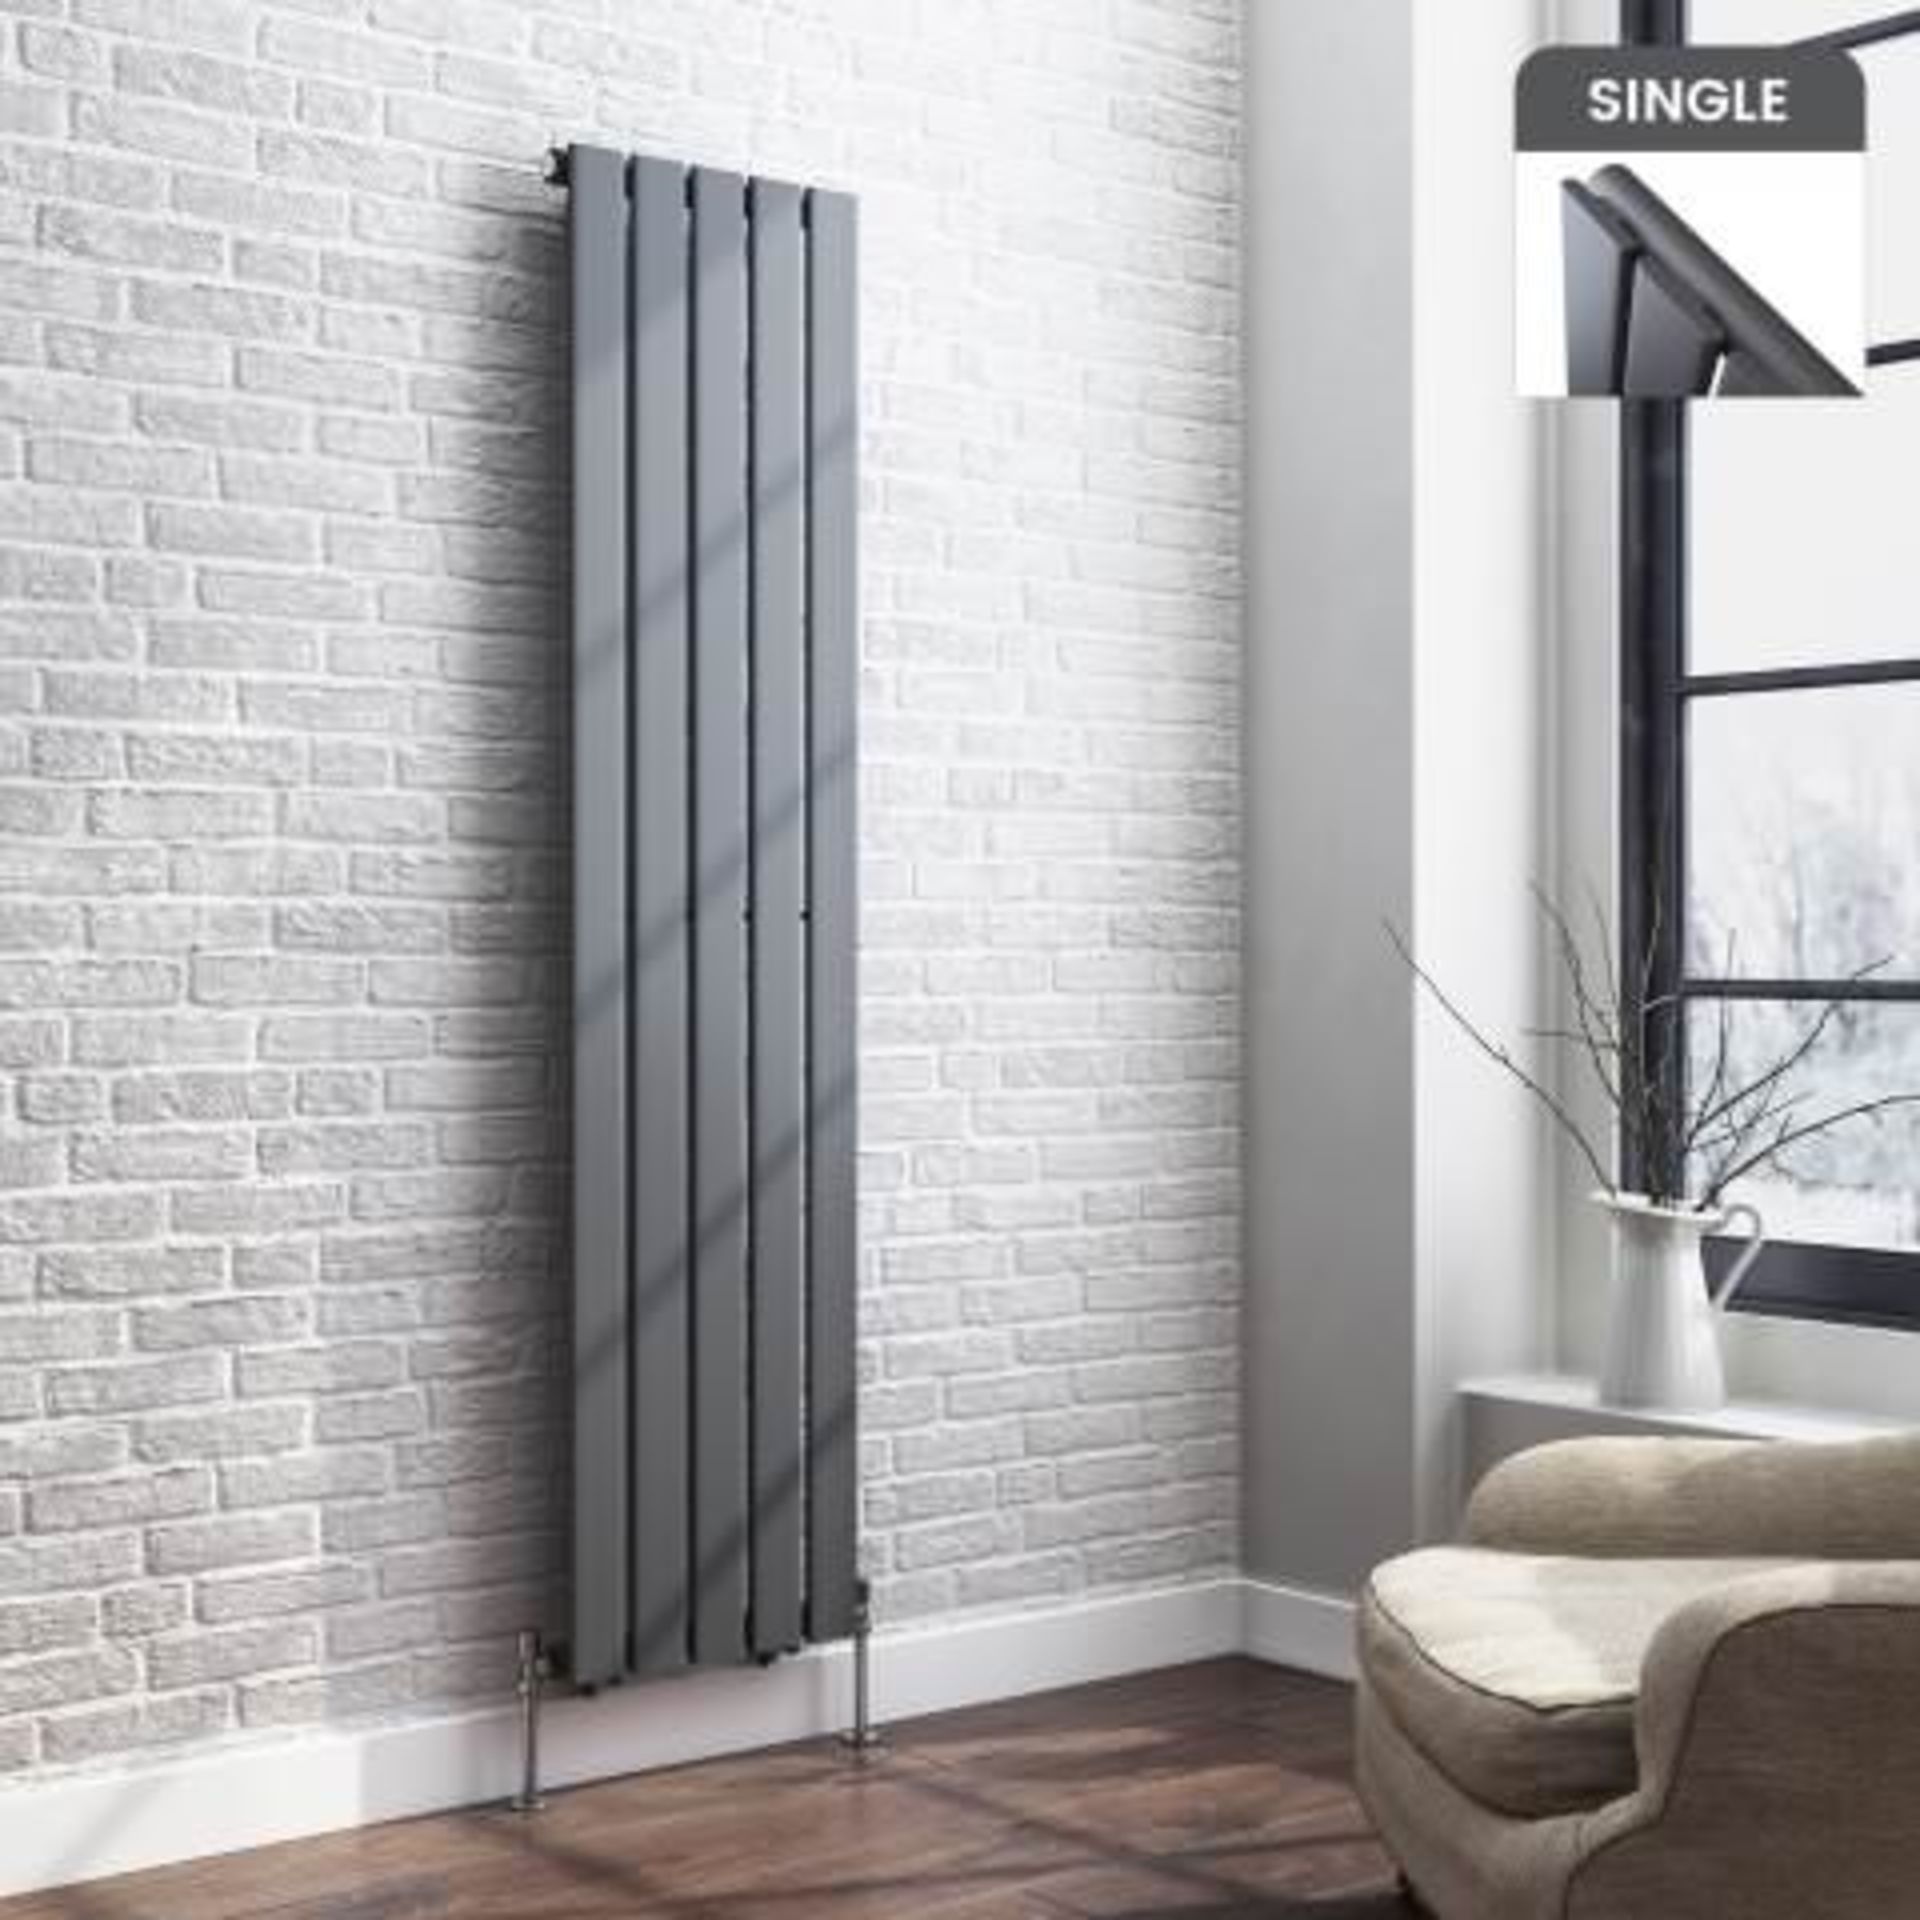 (I4) 1600x376mm Anthracite Single Flat Panel Vertical Radiator RRP £275.99 Designer Touch Ultra- - Image 3 of 3